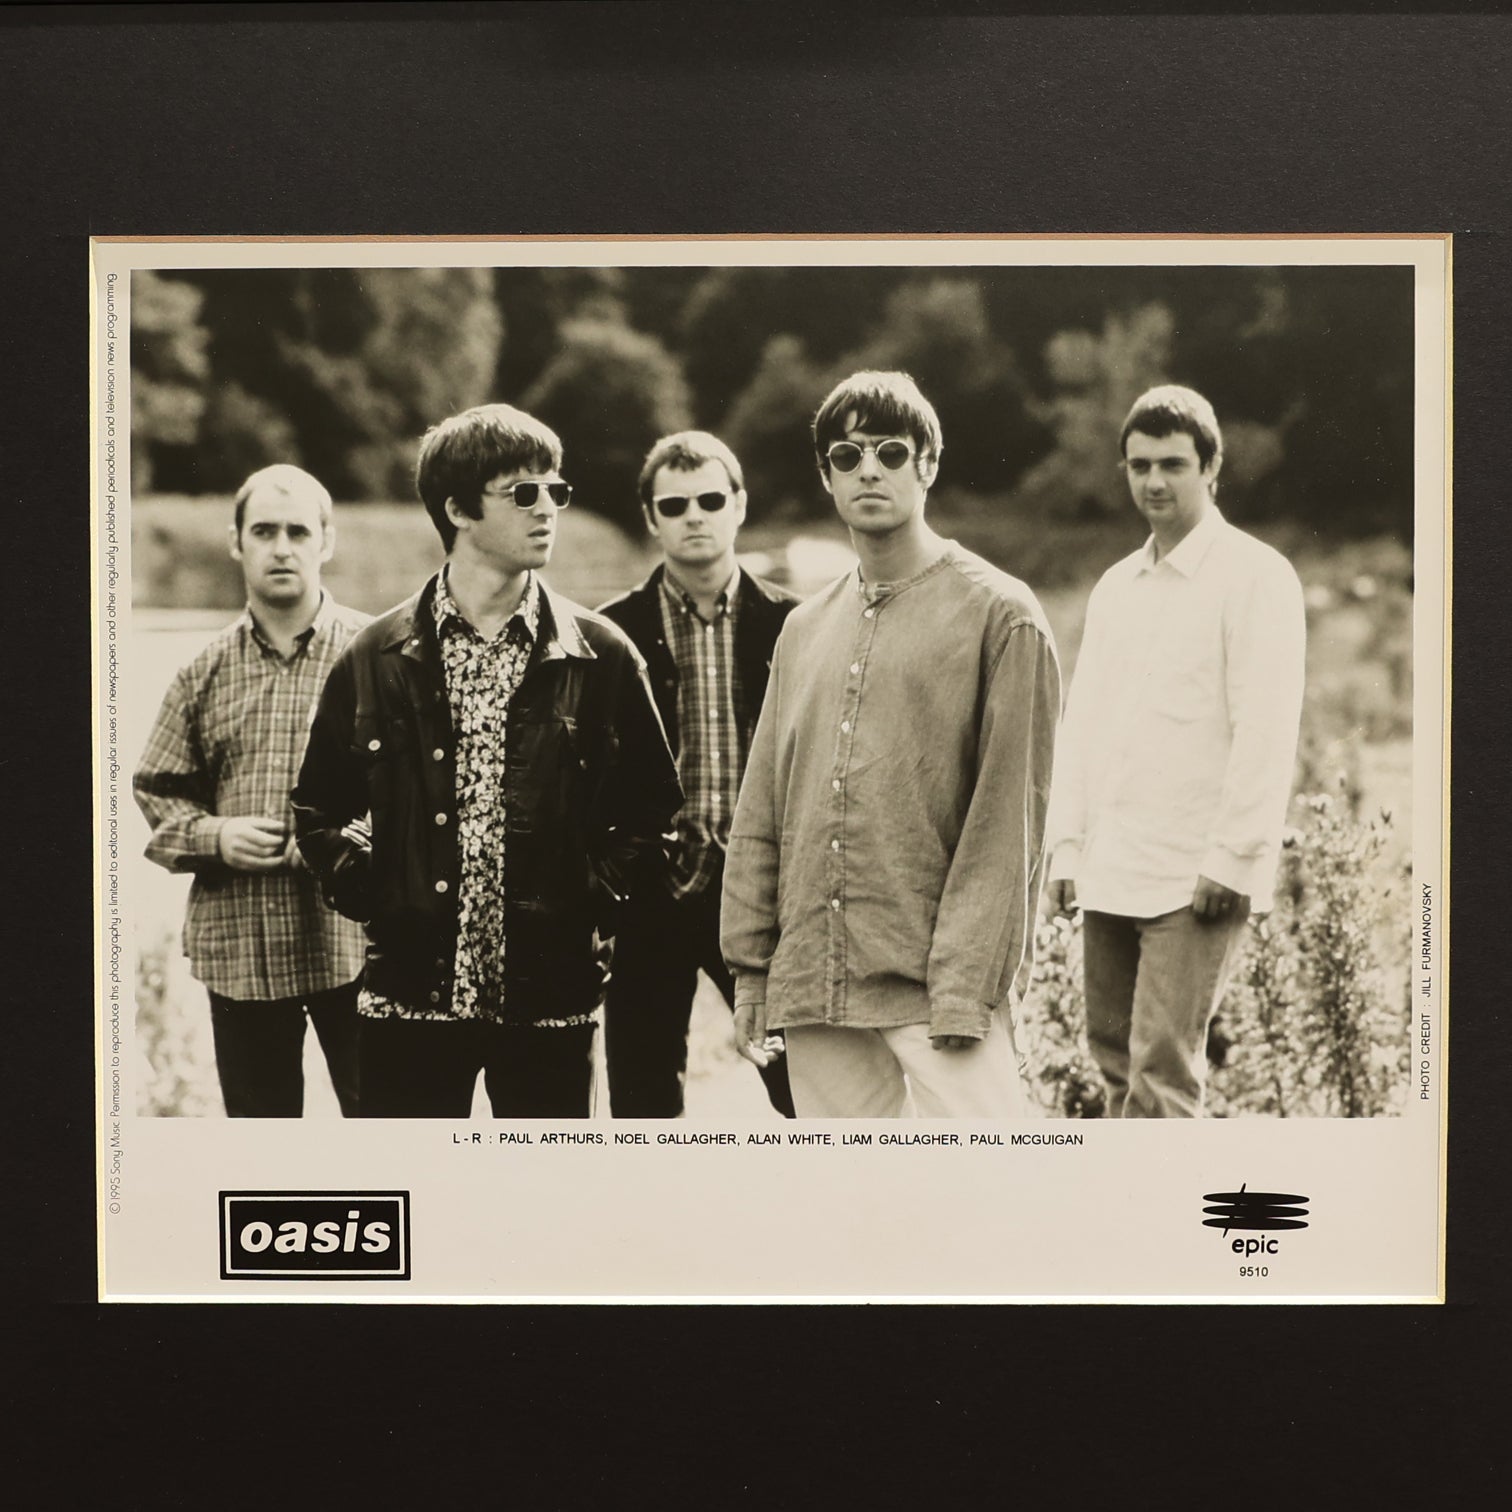 Oasis - Epic Records Promotional Photograph 2 - New Item